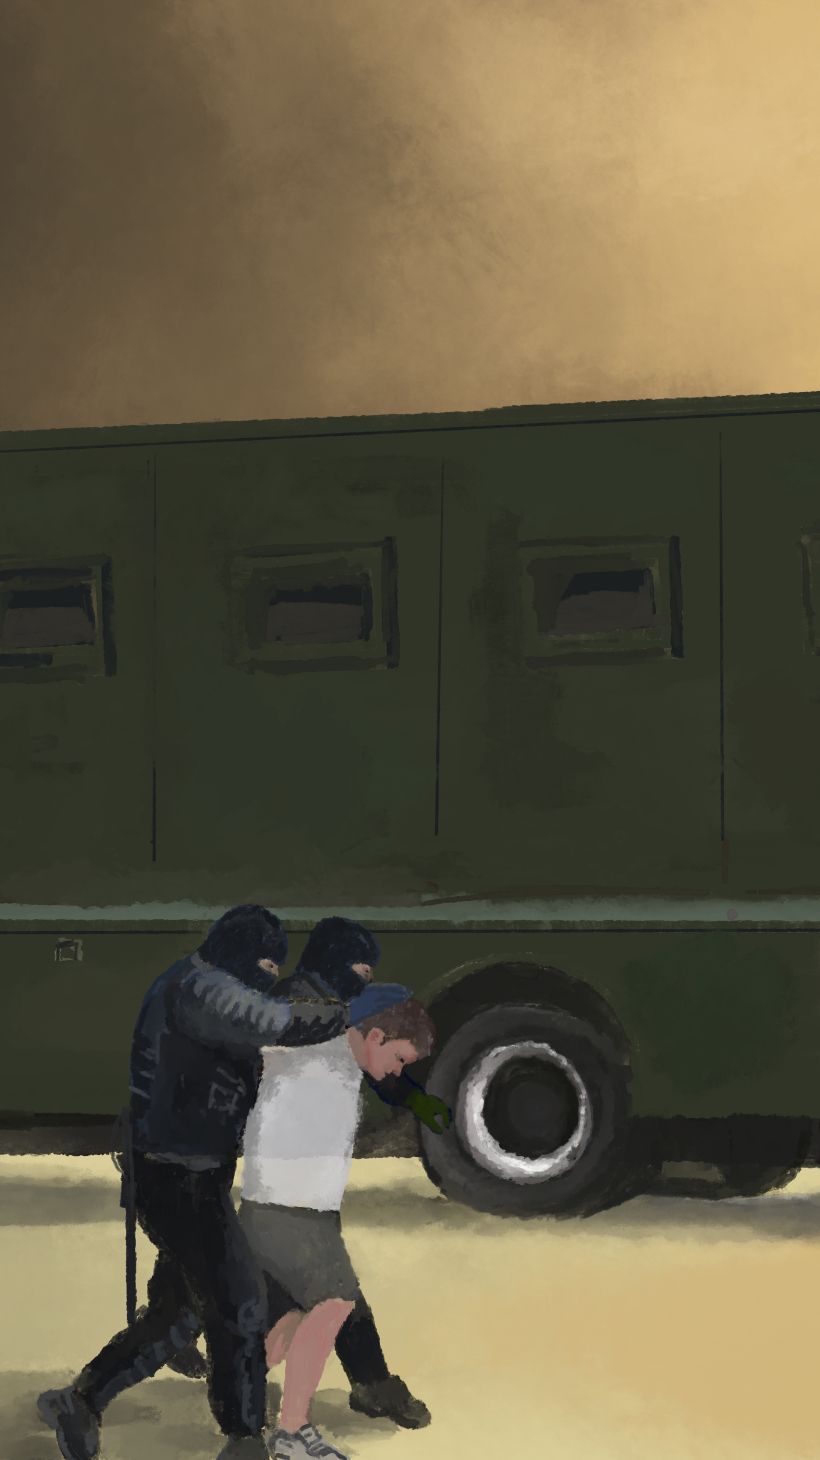 An illustration of a police truck with a police officer at the end of the truck with the door open and another police officer restraining a protester and pushing them towards the door at the back of the truck.